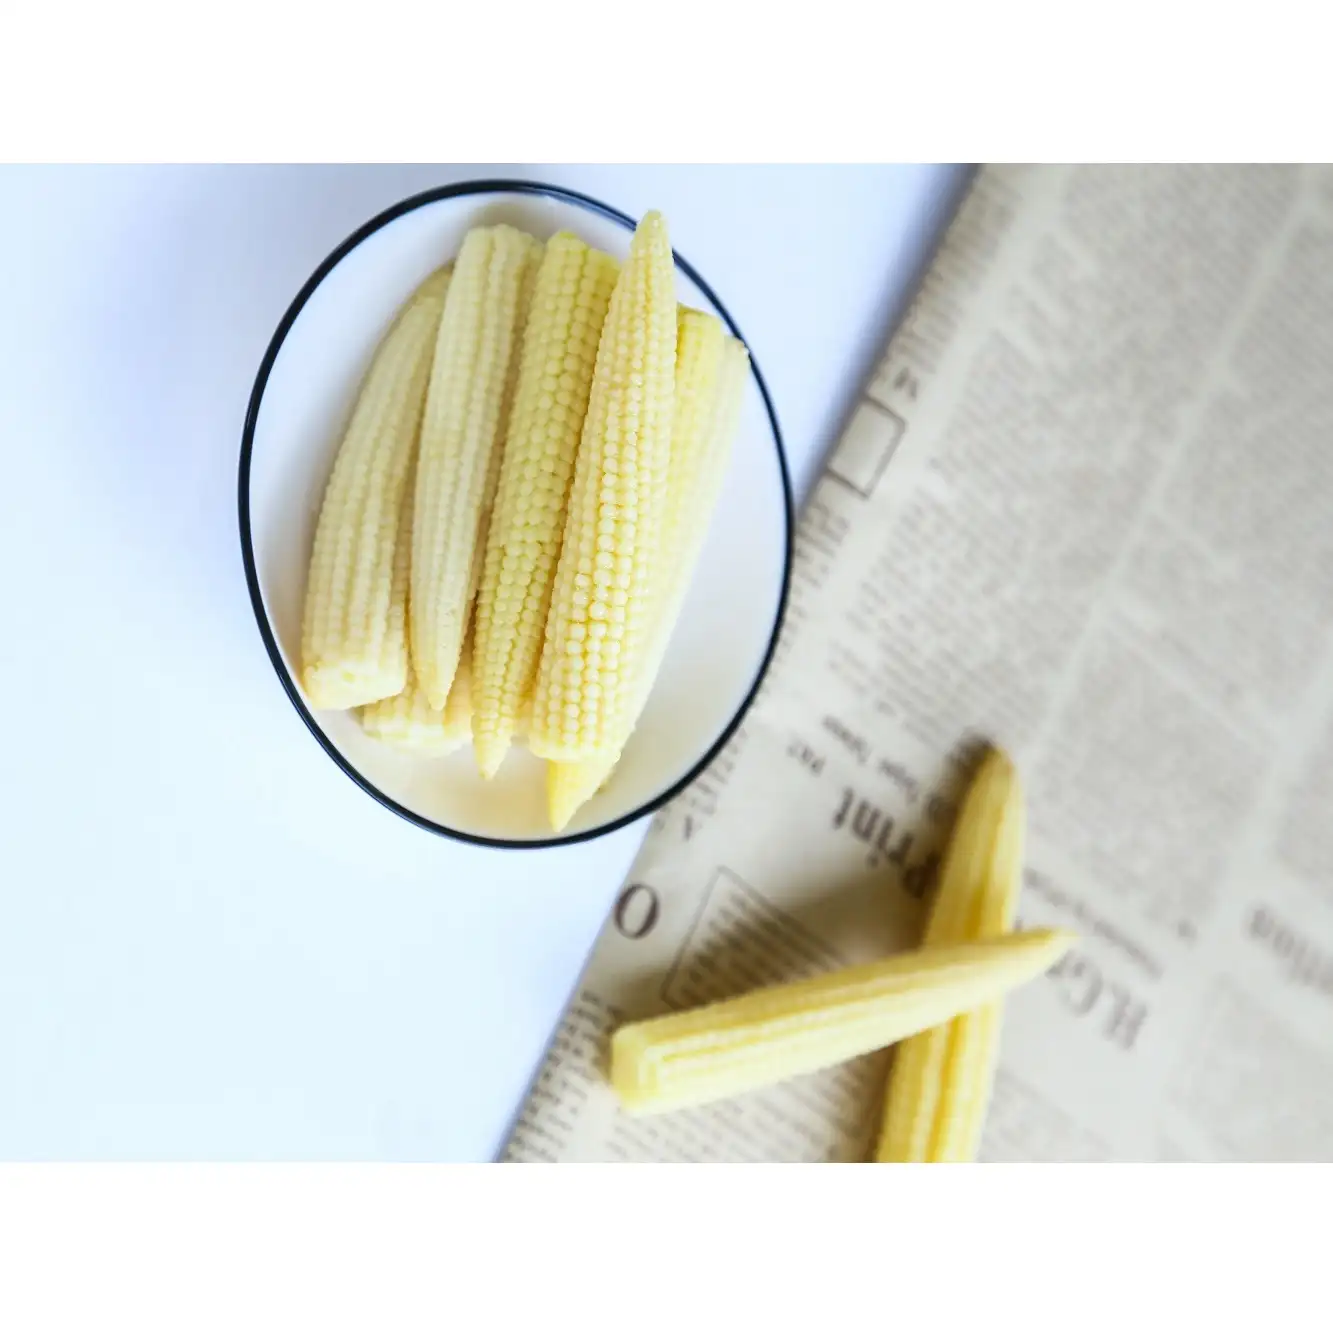 Guaranteed Quality Low Price Young Corn Whole Part Organic Canned Baby Corn with Salty Steamed Water Preservation Process